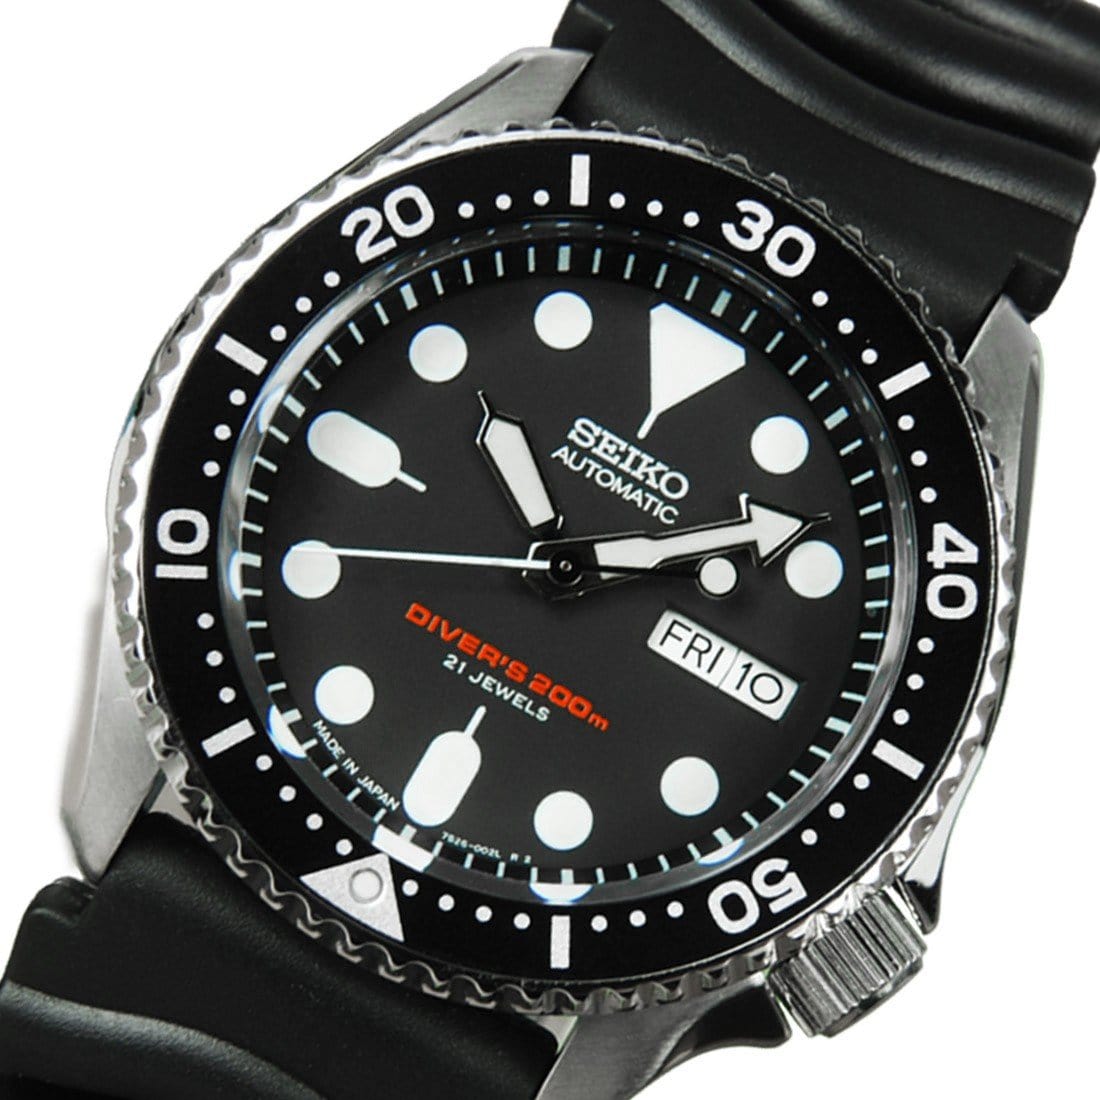 Seiko Divers Watch SKX007 SKX007J1 with Additional Stainless Mesh Strap